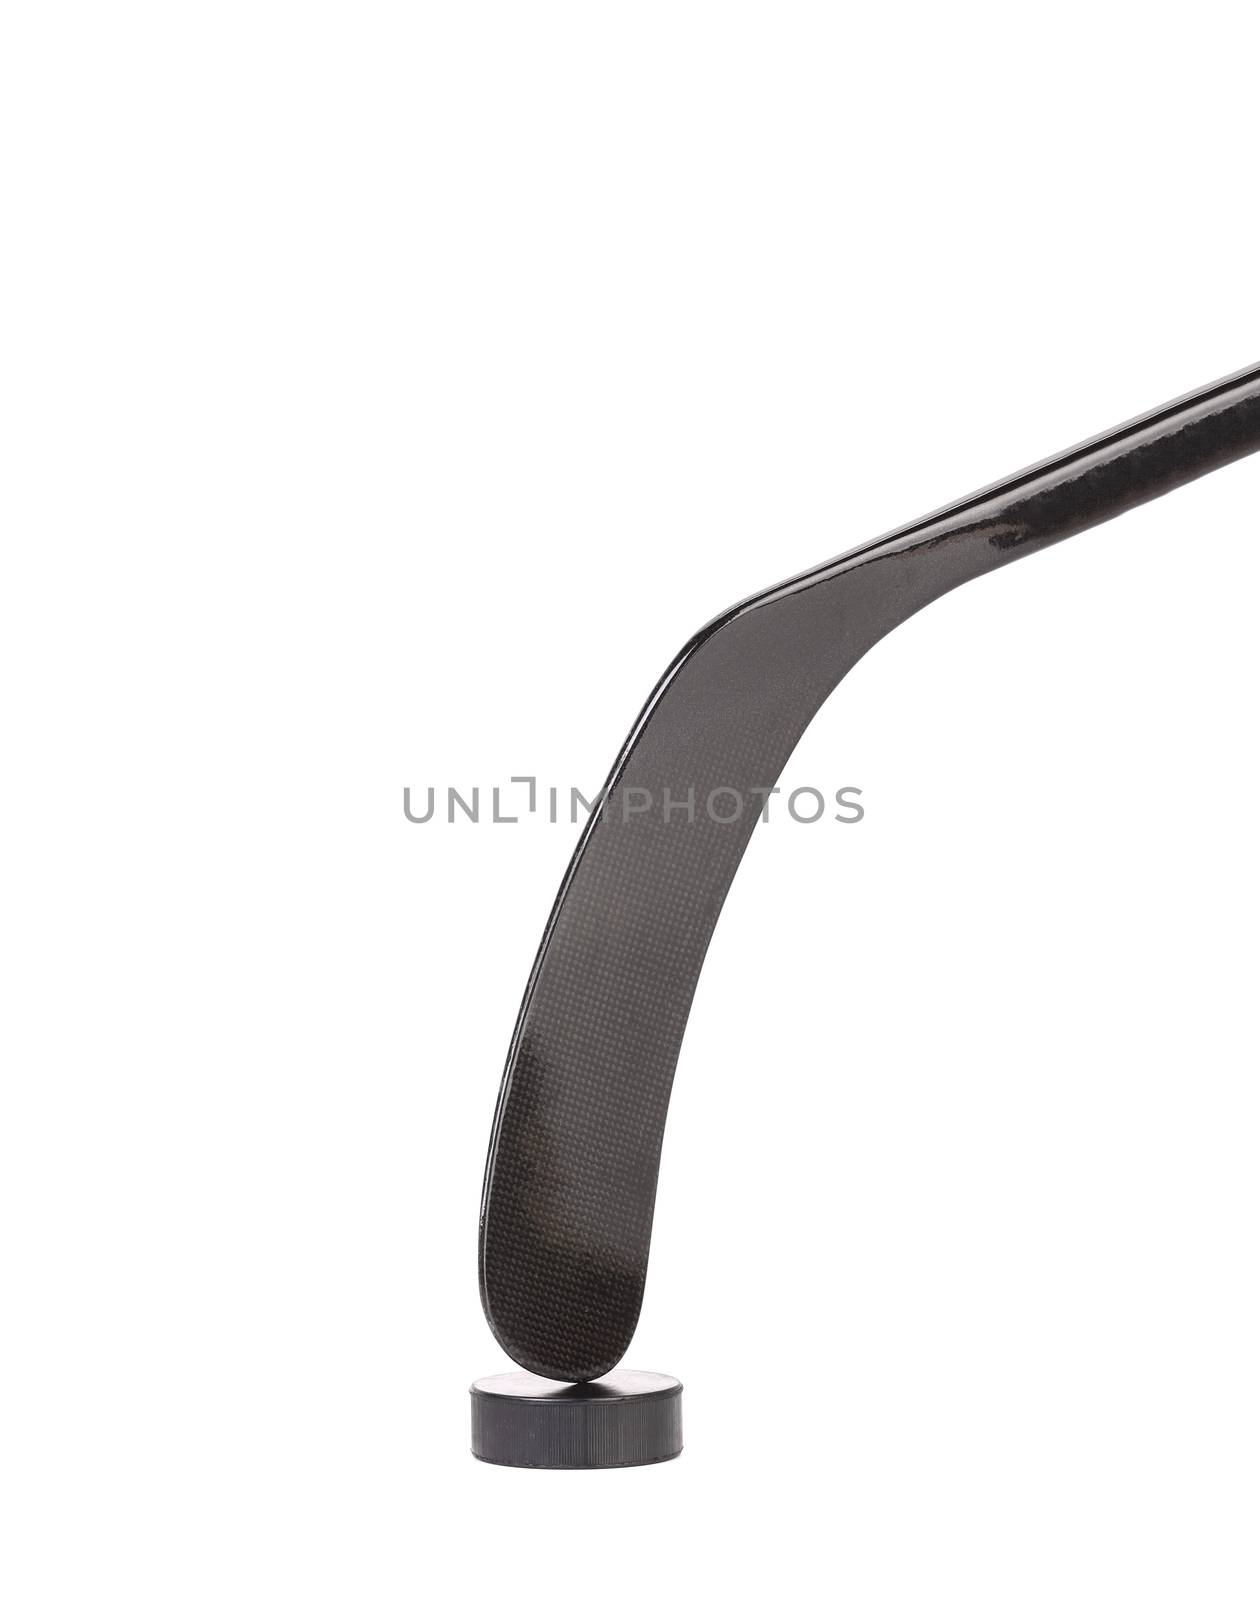 Black ice hockey stick and puck. Isolated on a white background.